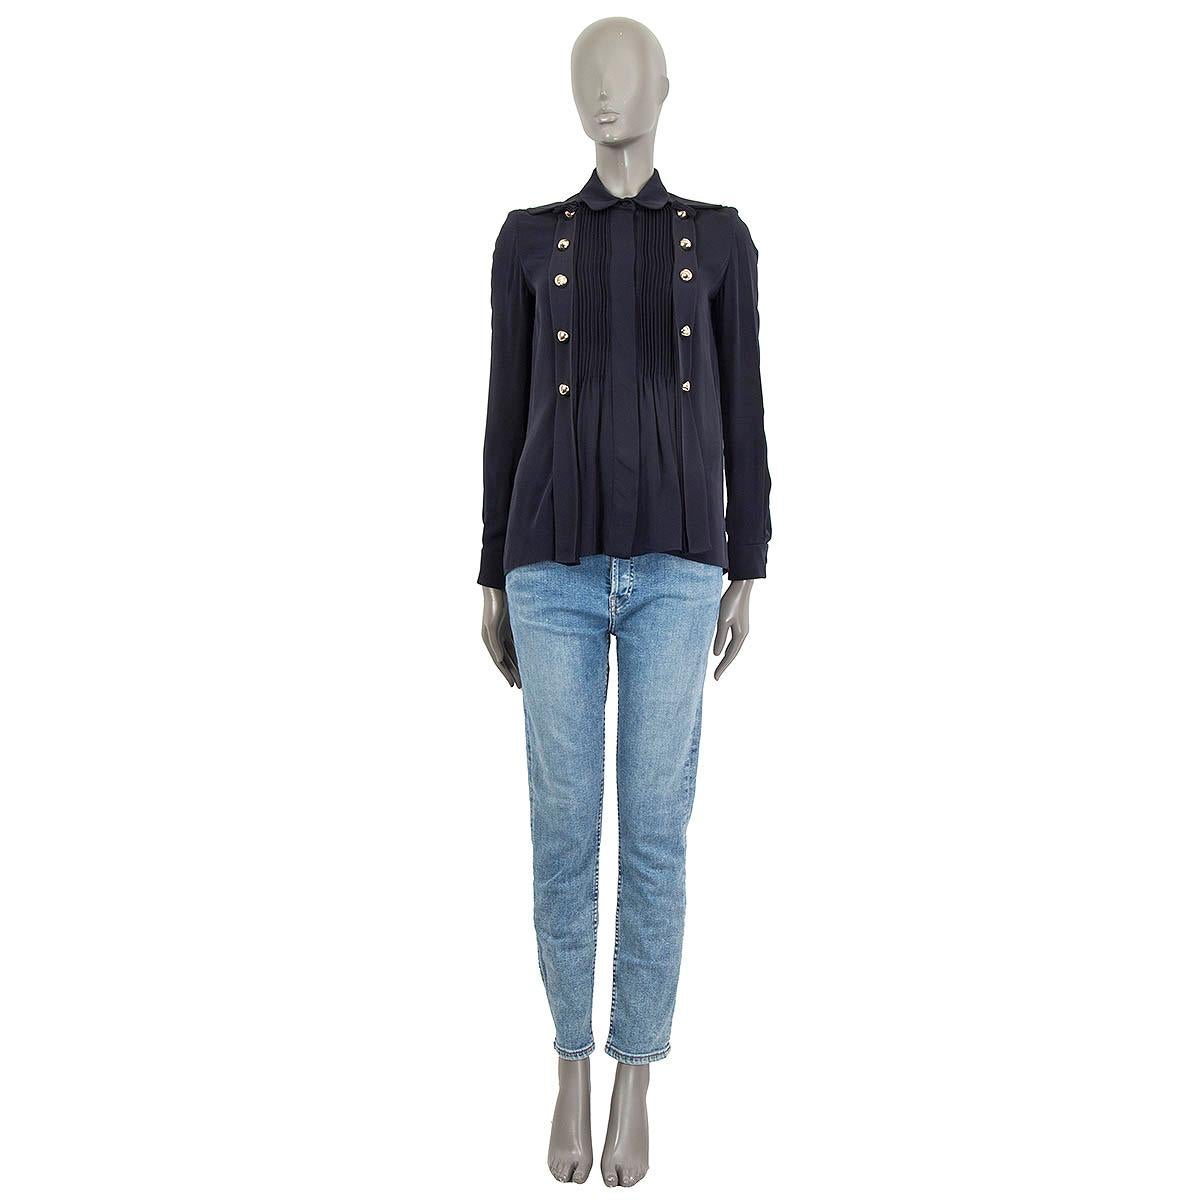 100% authentic Chloé oversized paneled long sleeve blouse in navy blue silk (100%). Features two faux button tapes on the front and buttoned cuffs. Opens with eight concealed buttons and a hook on the front. Unlined. Has been worn and is in